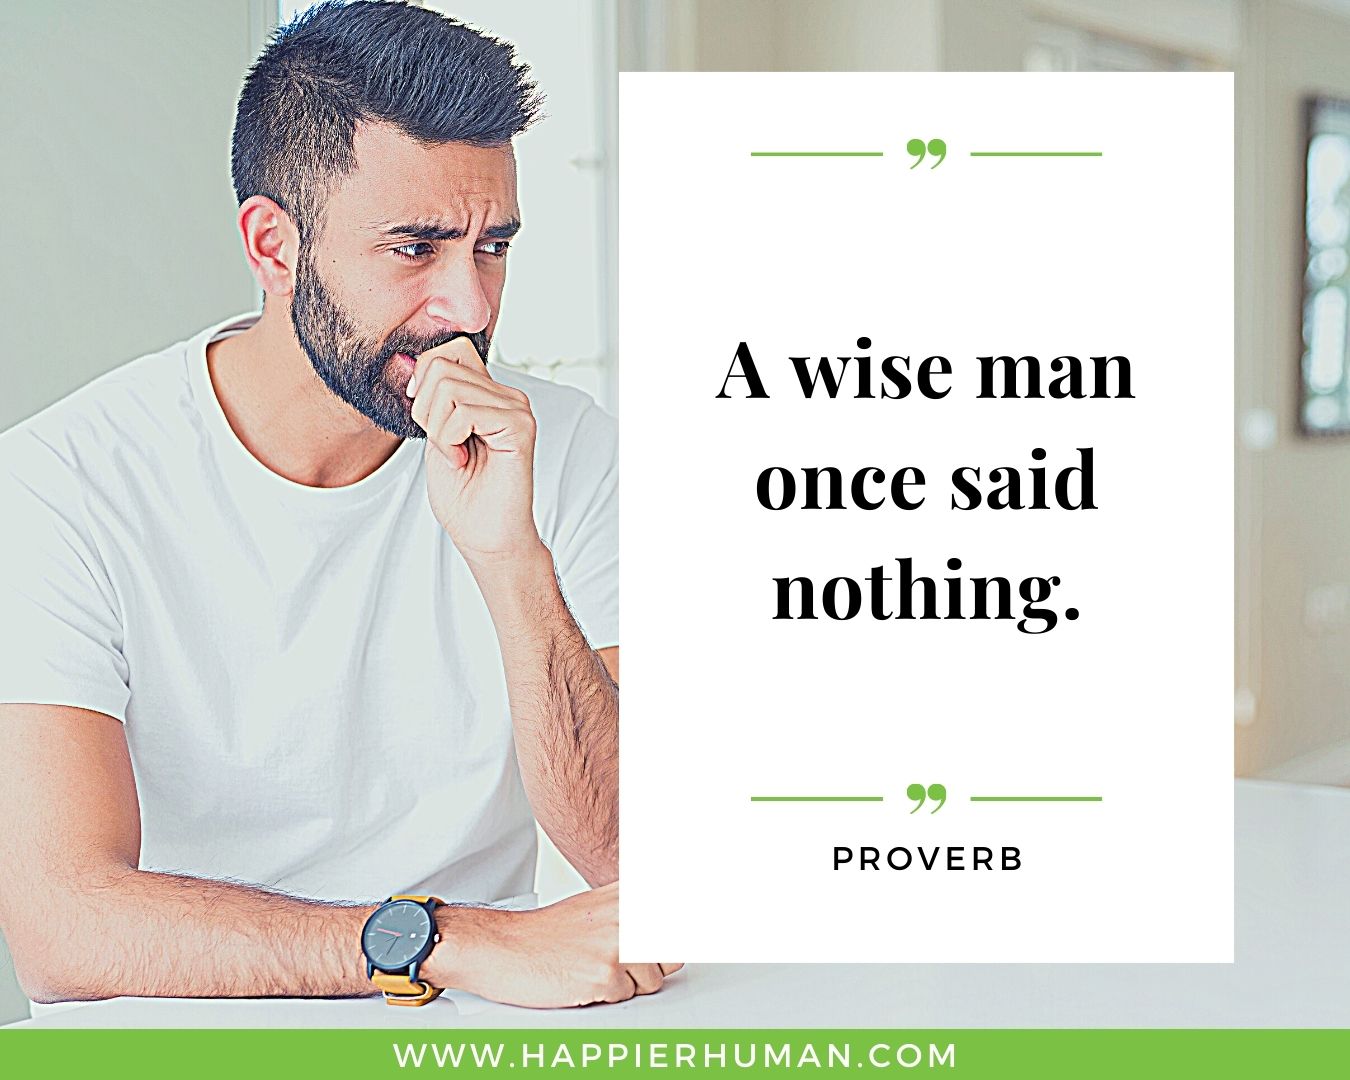 Introvert Quotes - “A wise man once said nothing.” – Proverb